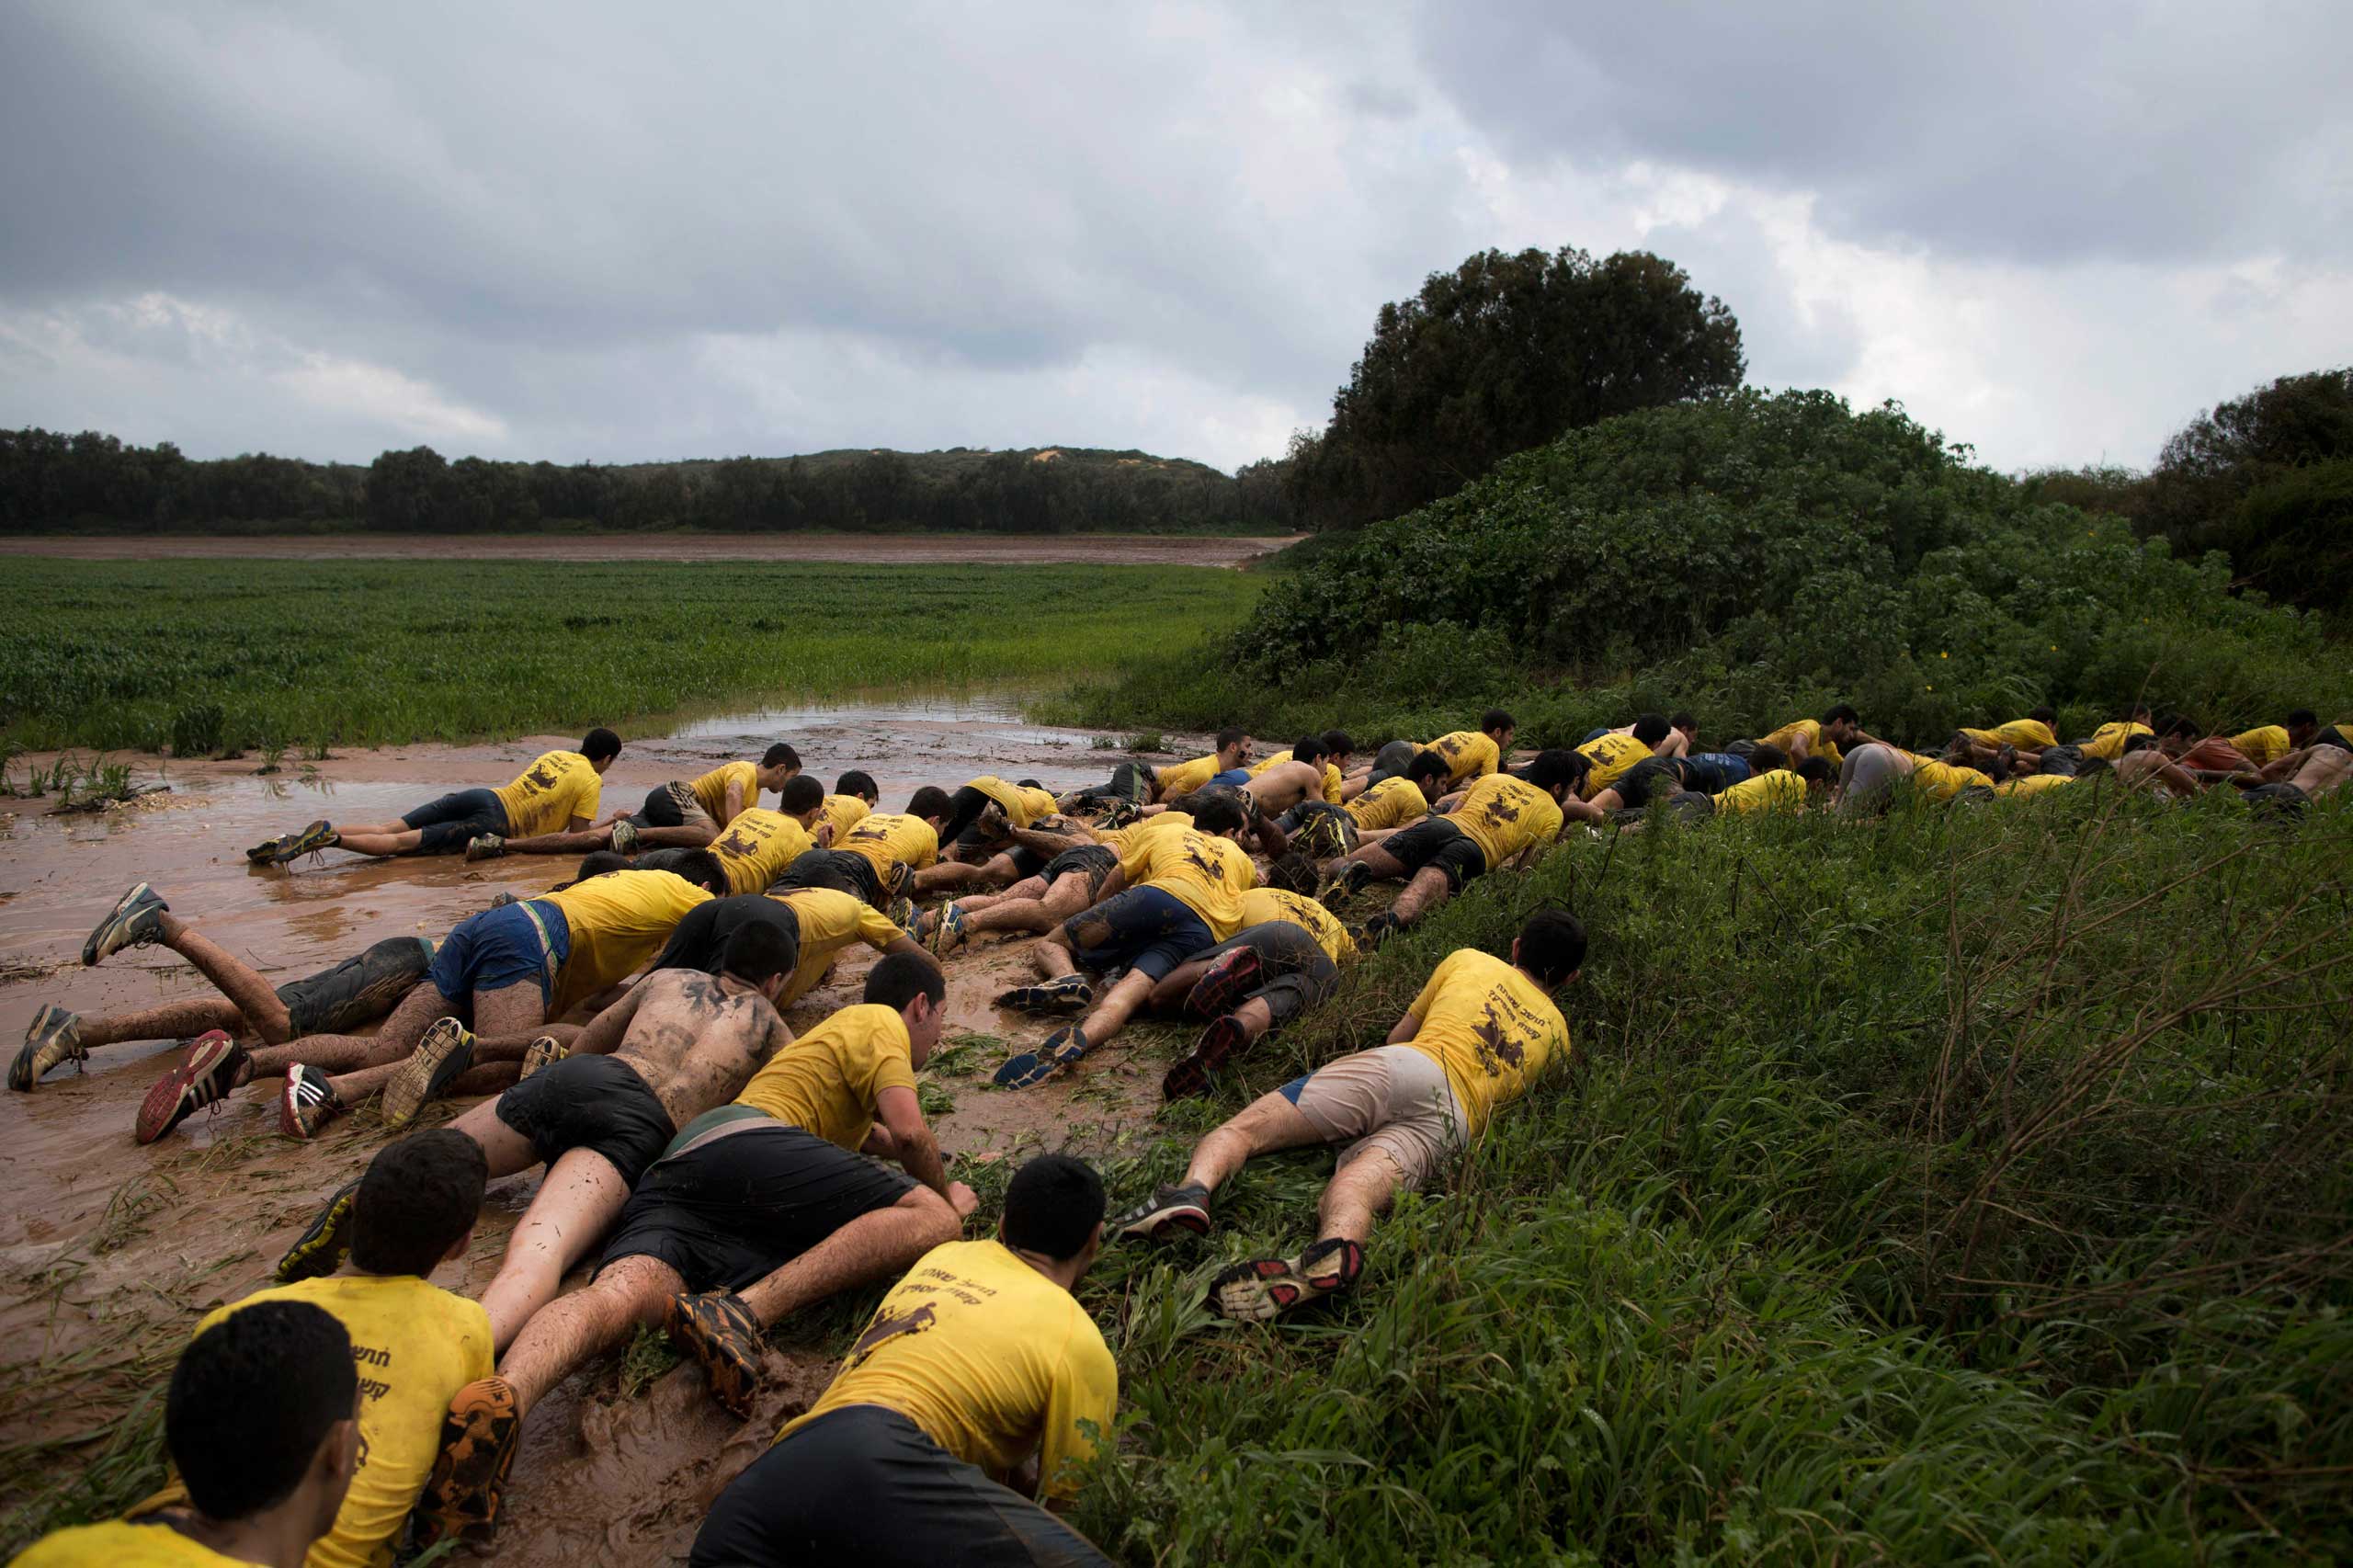 High-school seniors preparing to join the Israeli military later this year crawl out of mud up to a grassy embankment during an exercise near Yakum, central Israel,  Feb. 13, 2015.